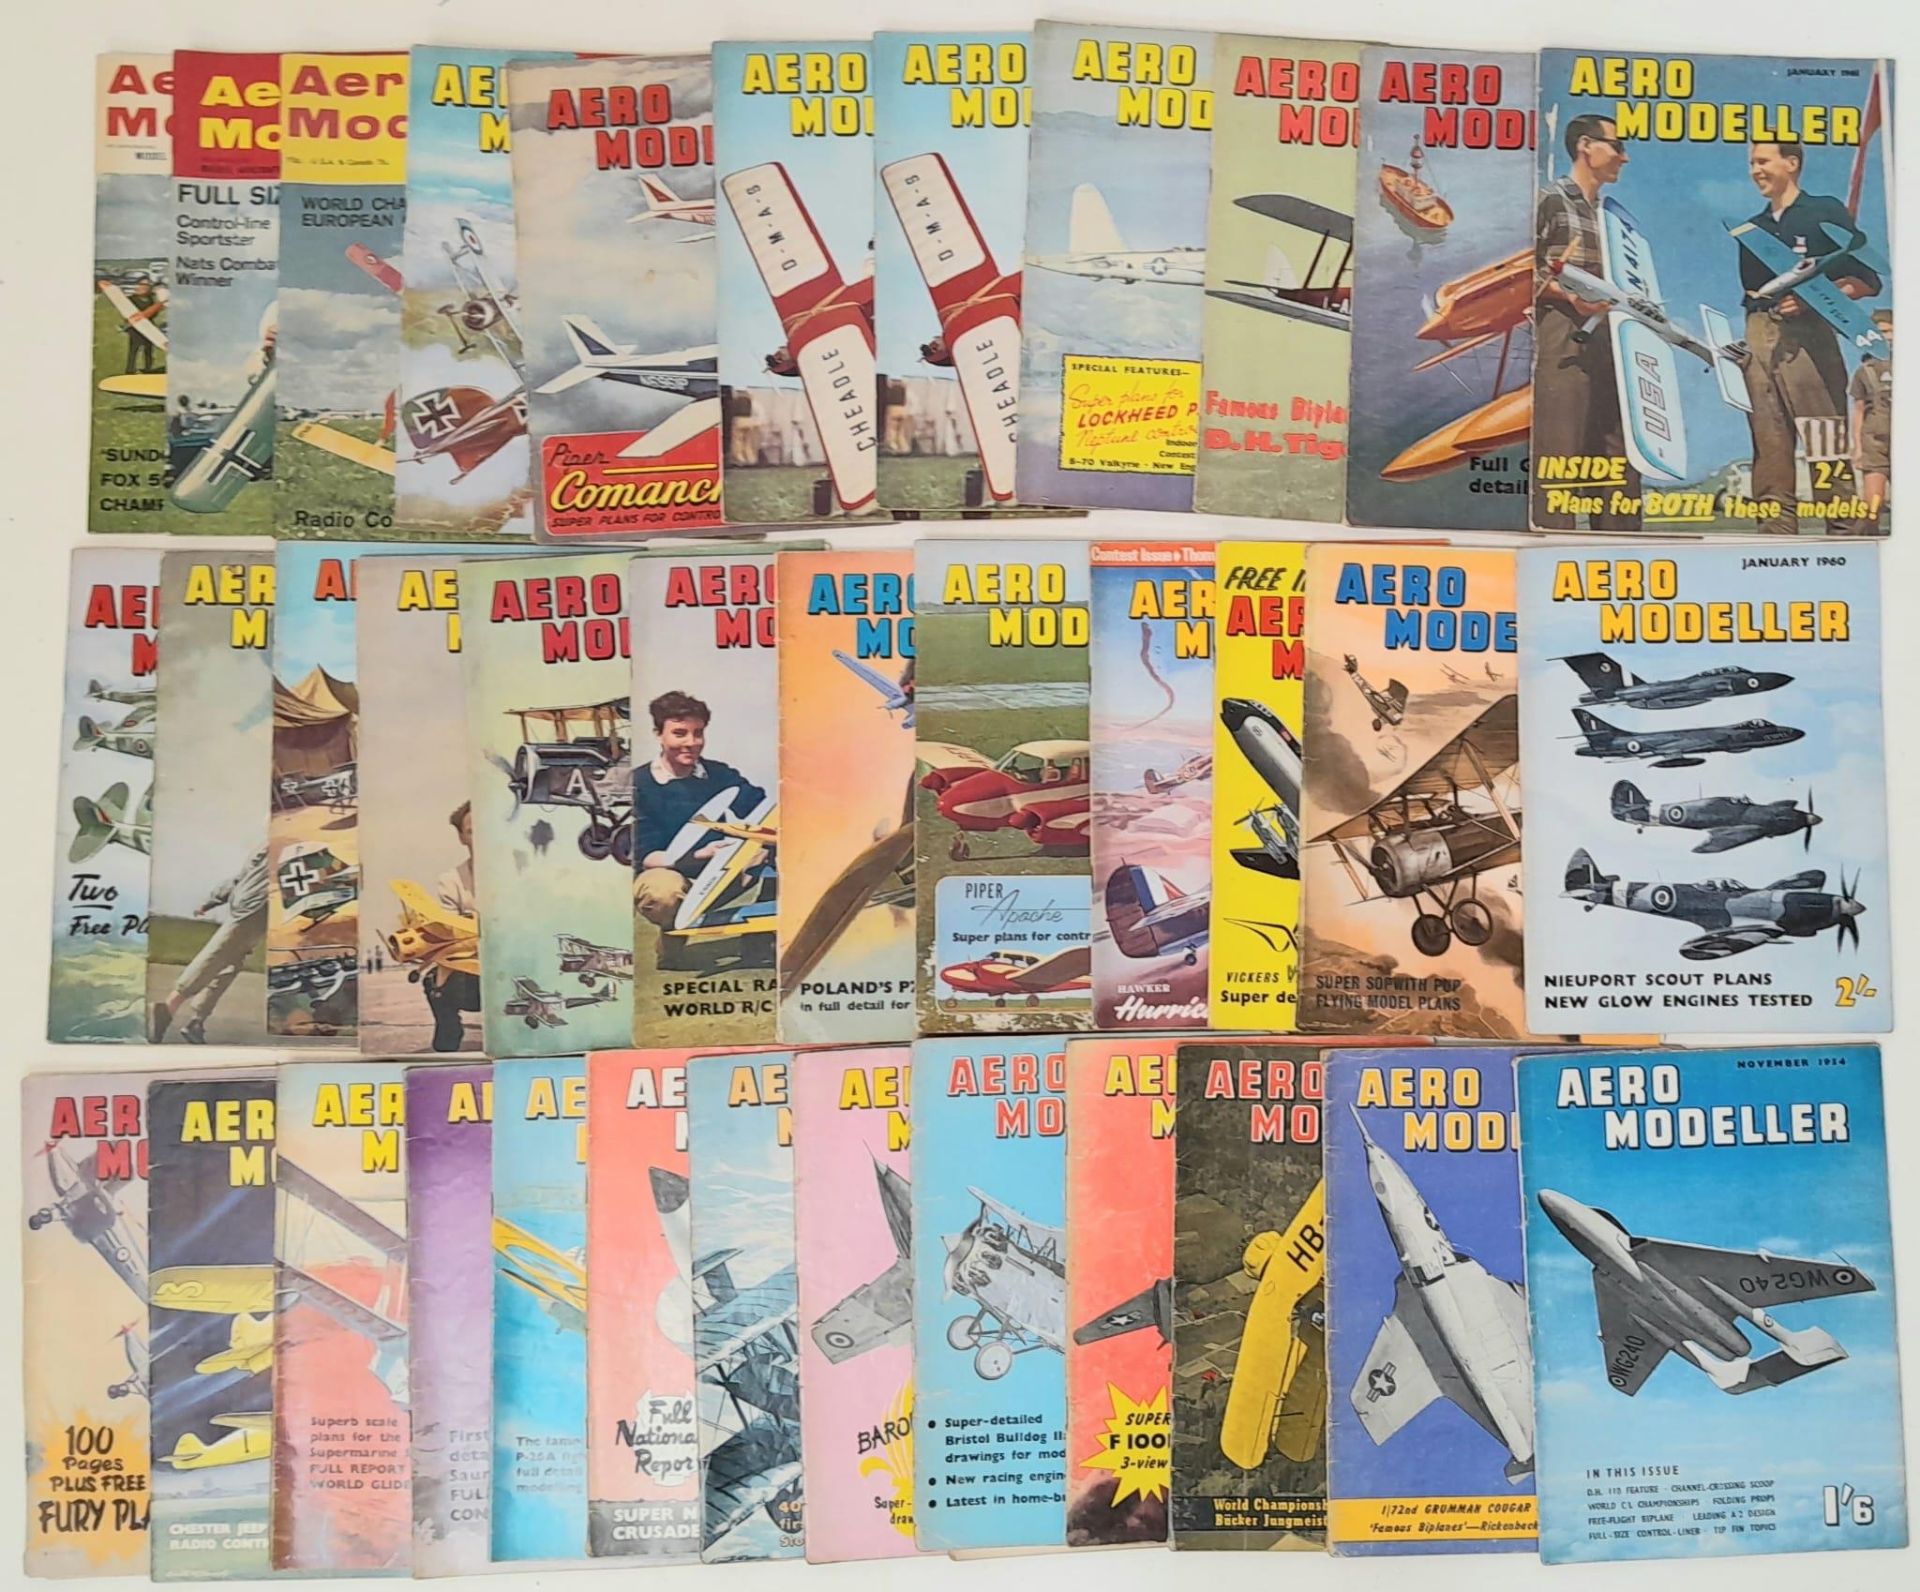 40 Copies of the Vintage Aero Modeller Magazine. Please see inventory photo for finer details.